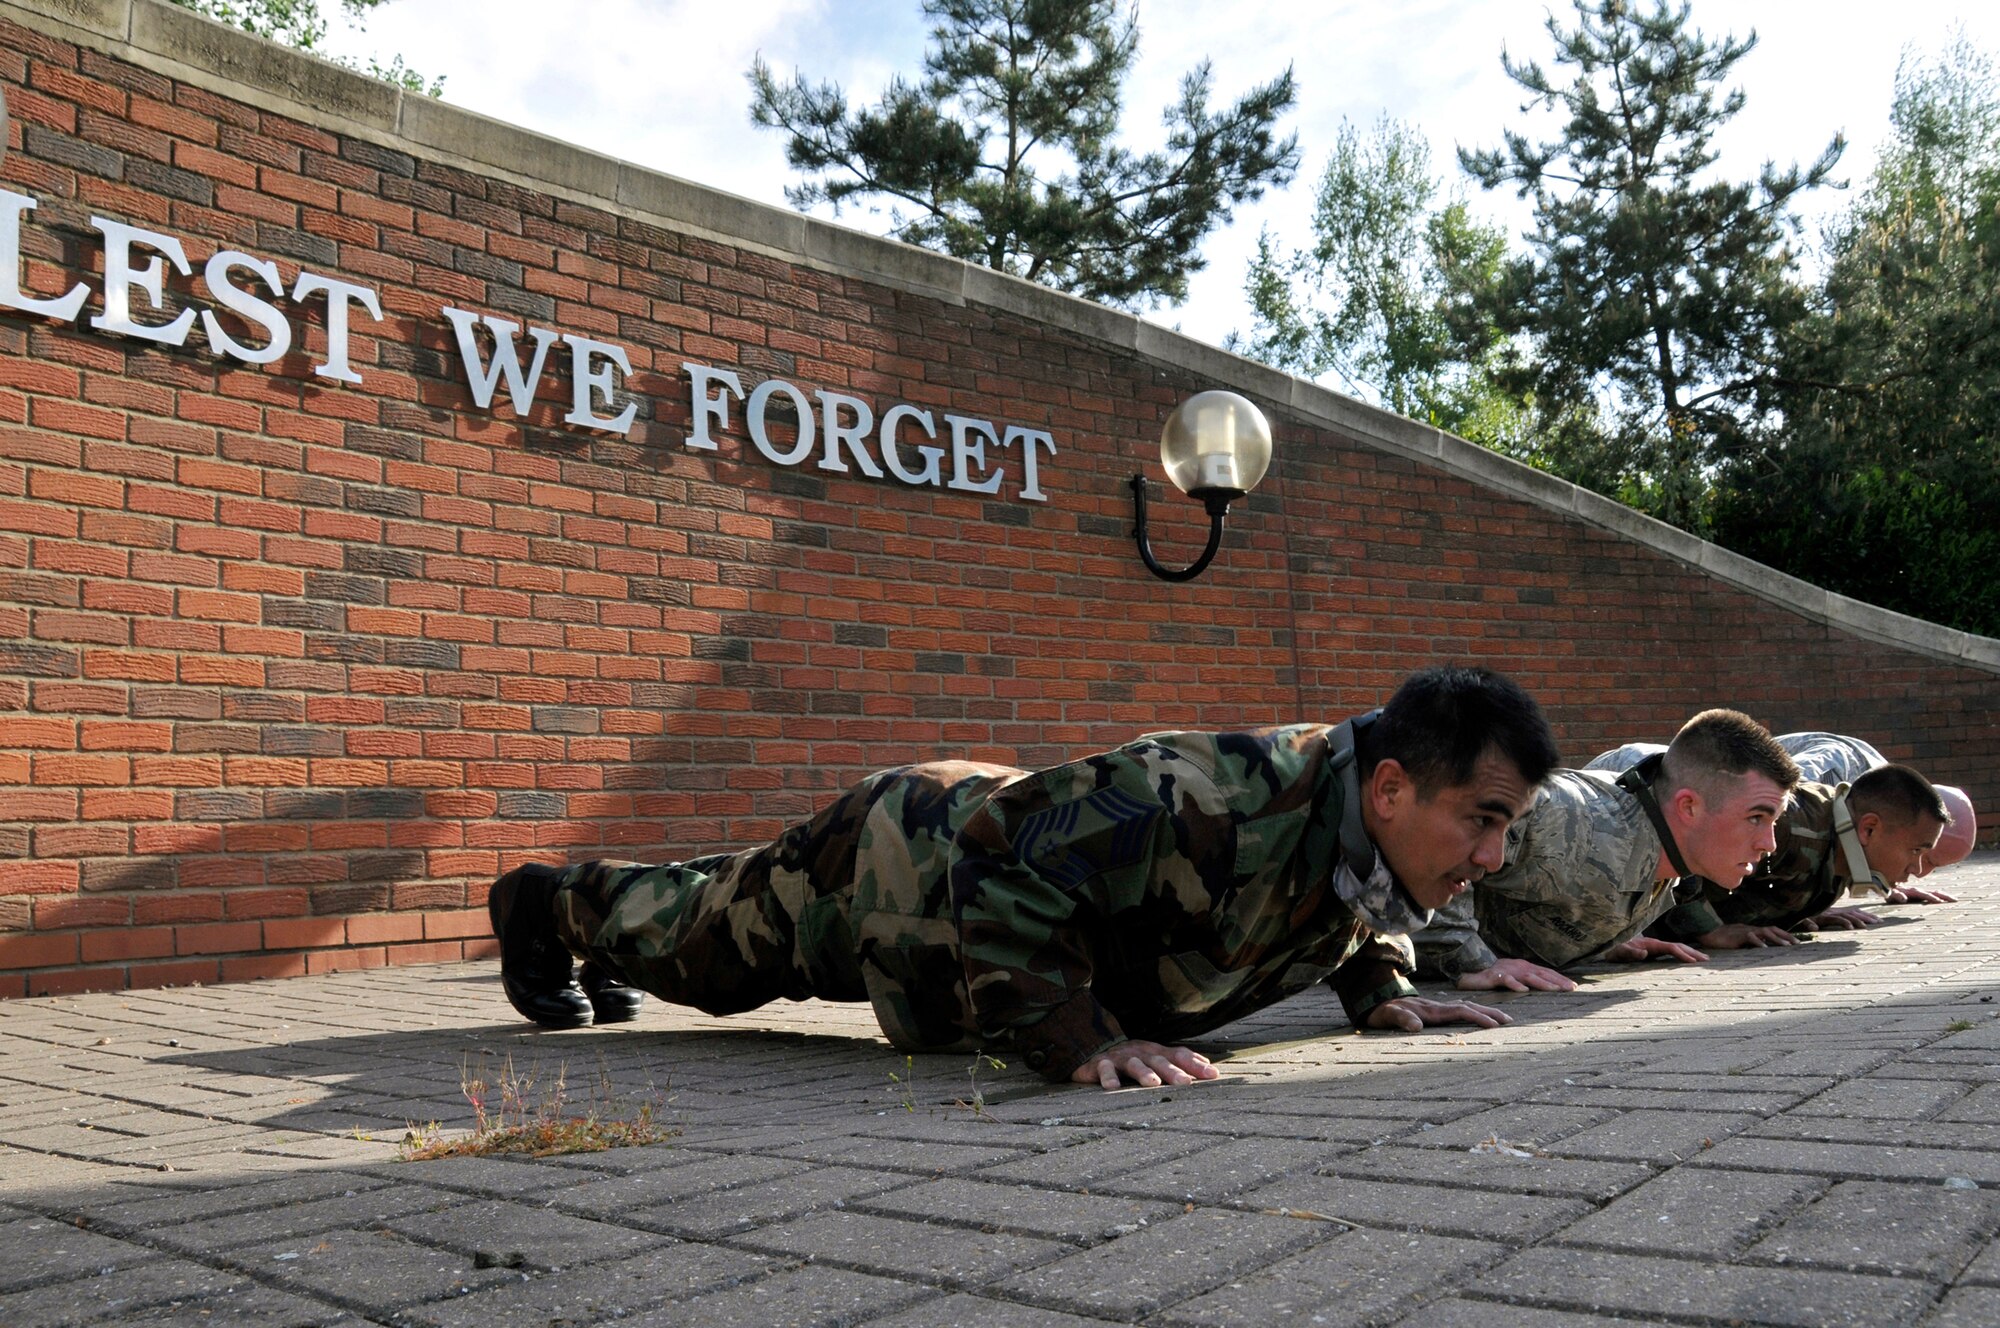 ROYAL AIR FORCE LAKENHEATH, England -- Airmen perform ten, four count pushups in front of the "Lest We Forget" memorial park, May 11, 2009. Pushups were one of several tasks during the 5K Ruck March for 2009 National Police Week May 11 to 15.  (U.S. Air Force photo by Airman 1st Class Perry Aston) 